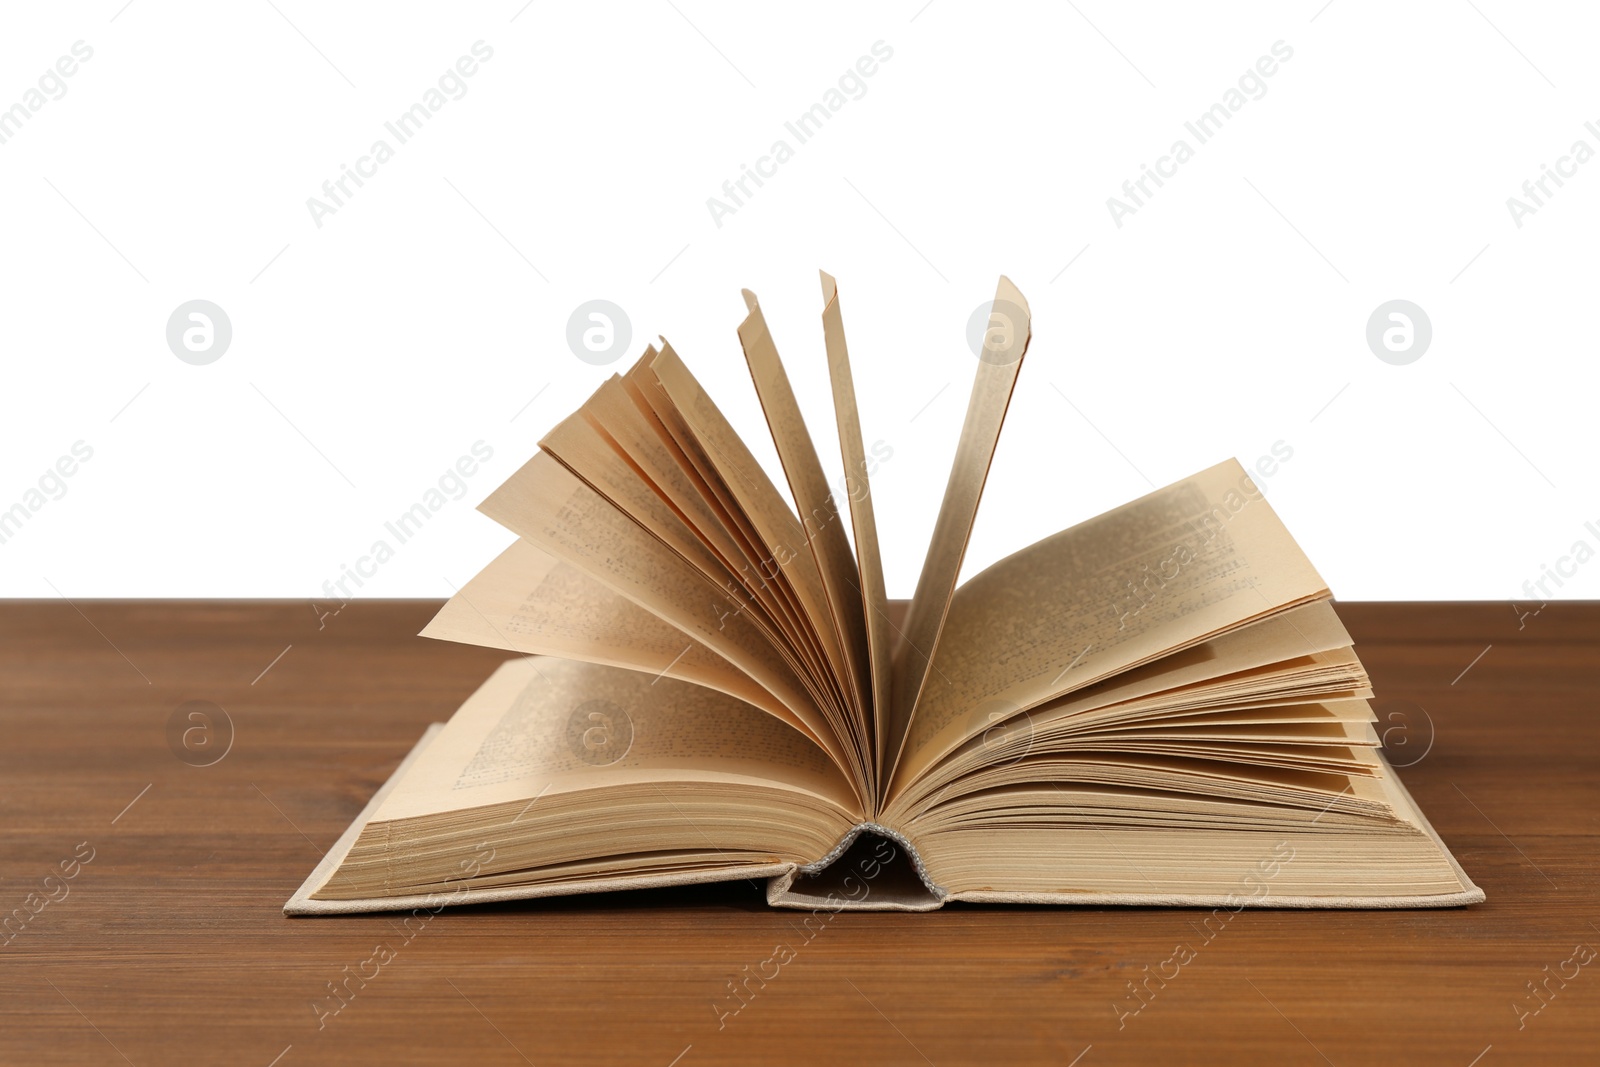 Photo of Open book on wooden table against white background. Library material